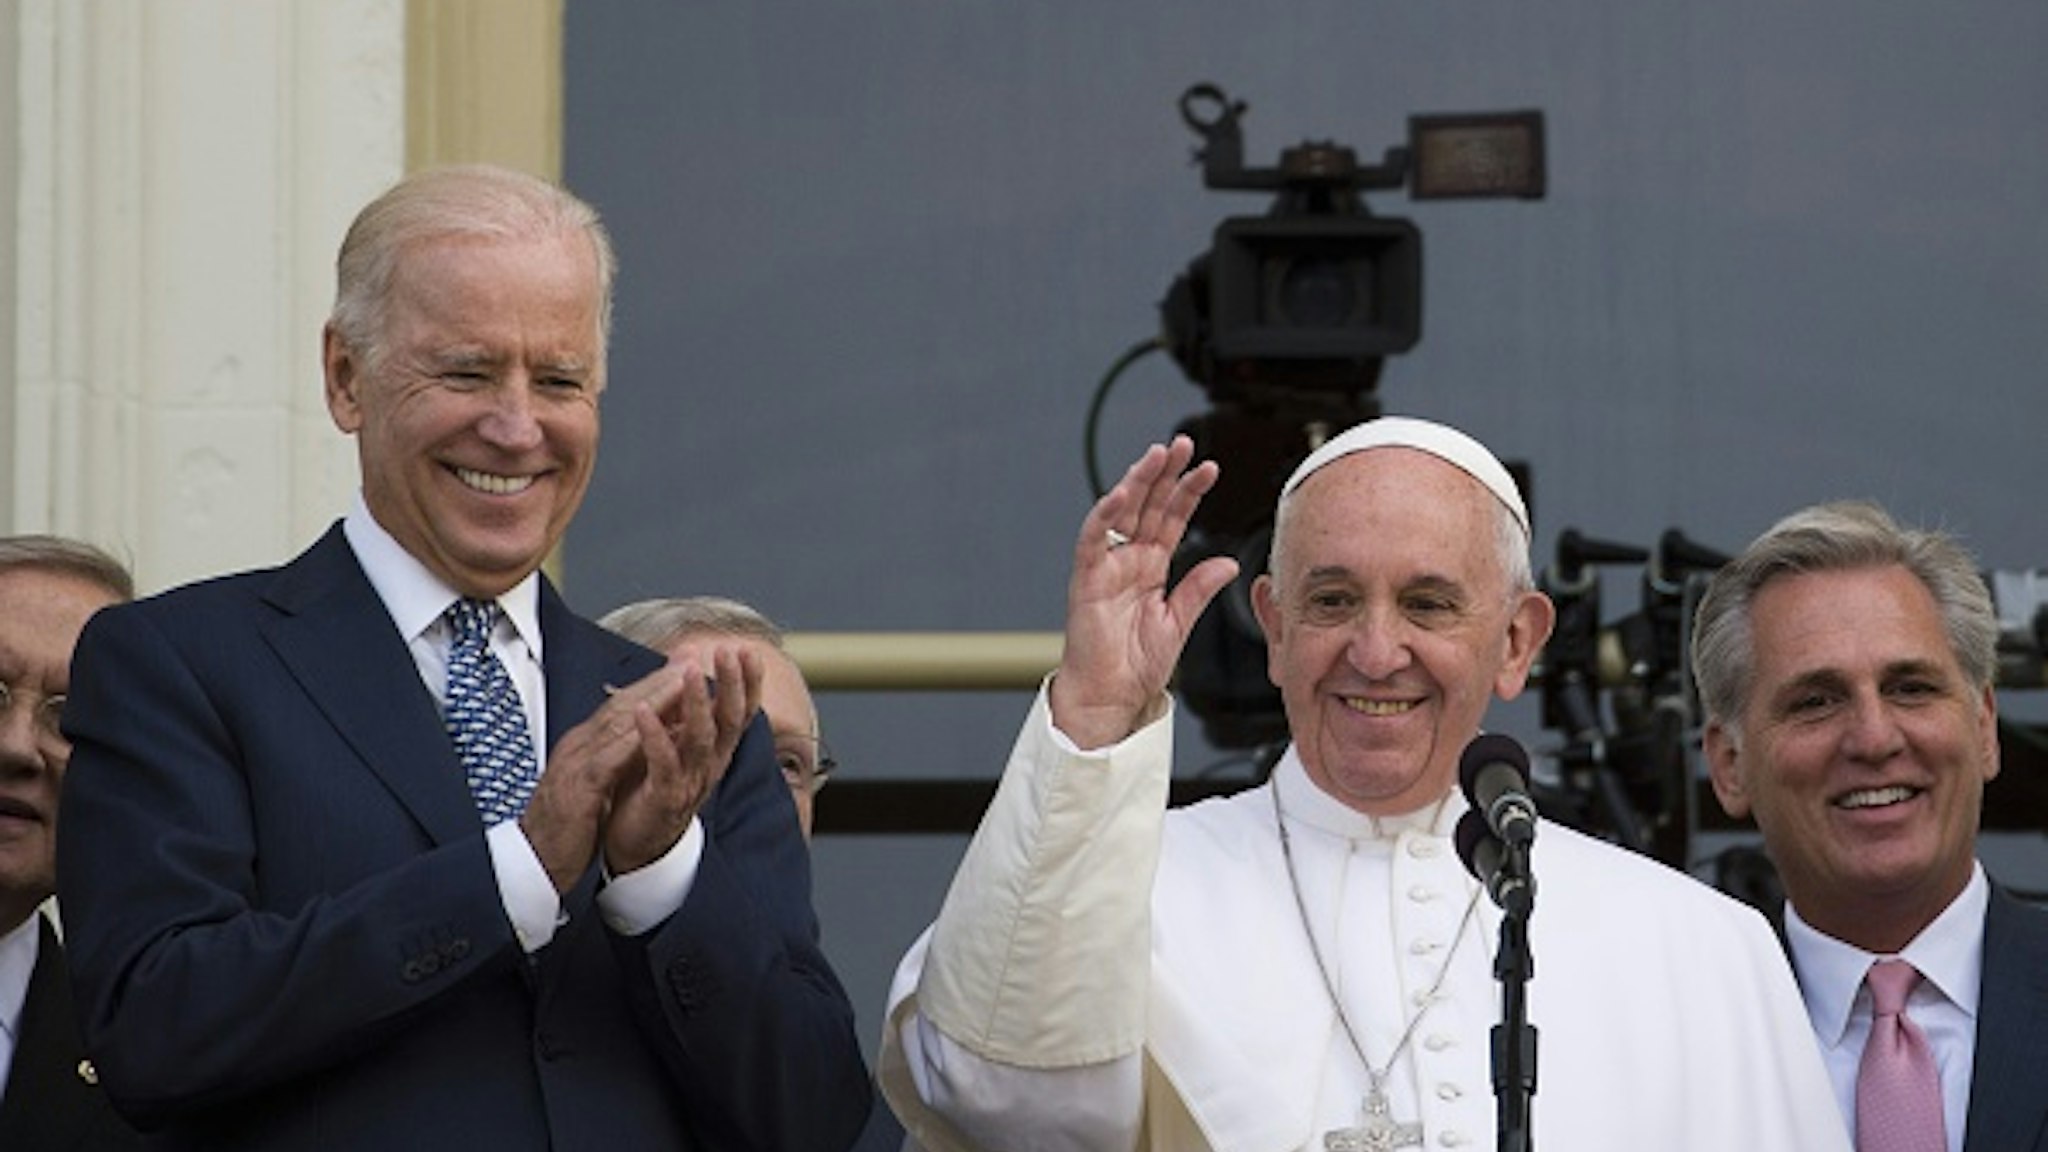 Pope Francis (C) waves, next to US Vice President Joe Biden(L), on a balcony after speaking at the US Capitol building in Washington, DC on September 24, 2015. AFP PHOTO/ ANDREW CABALLERO-REYNOLDS